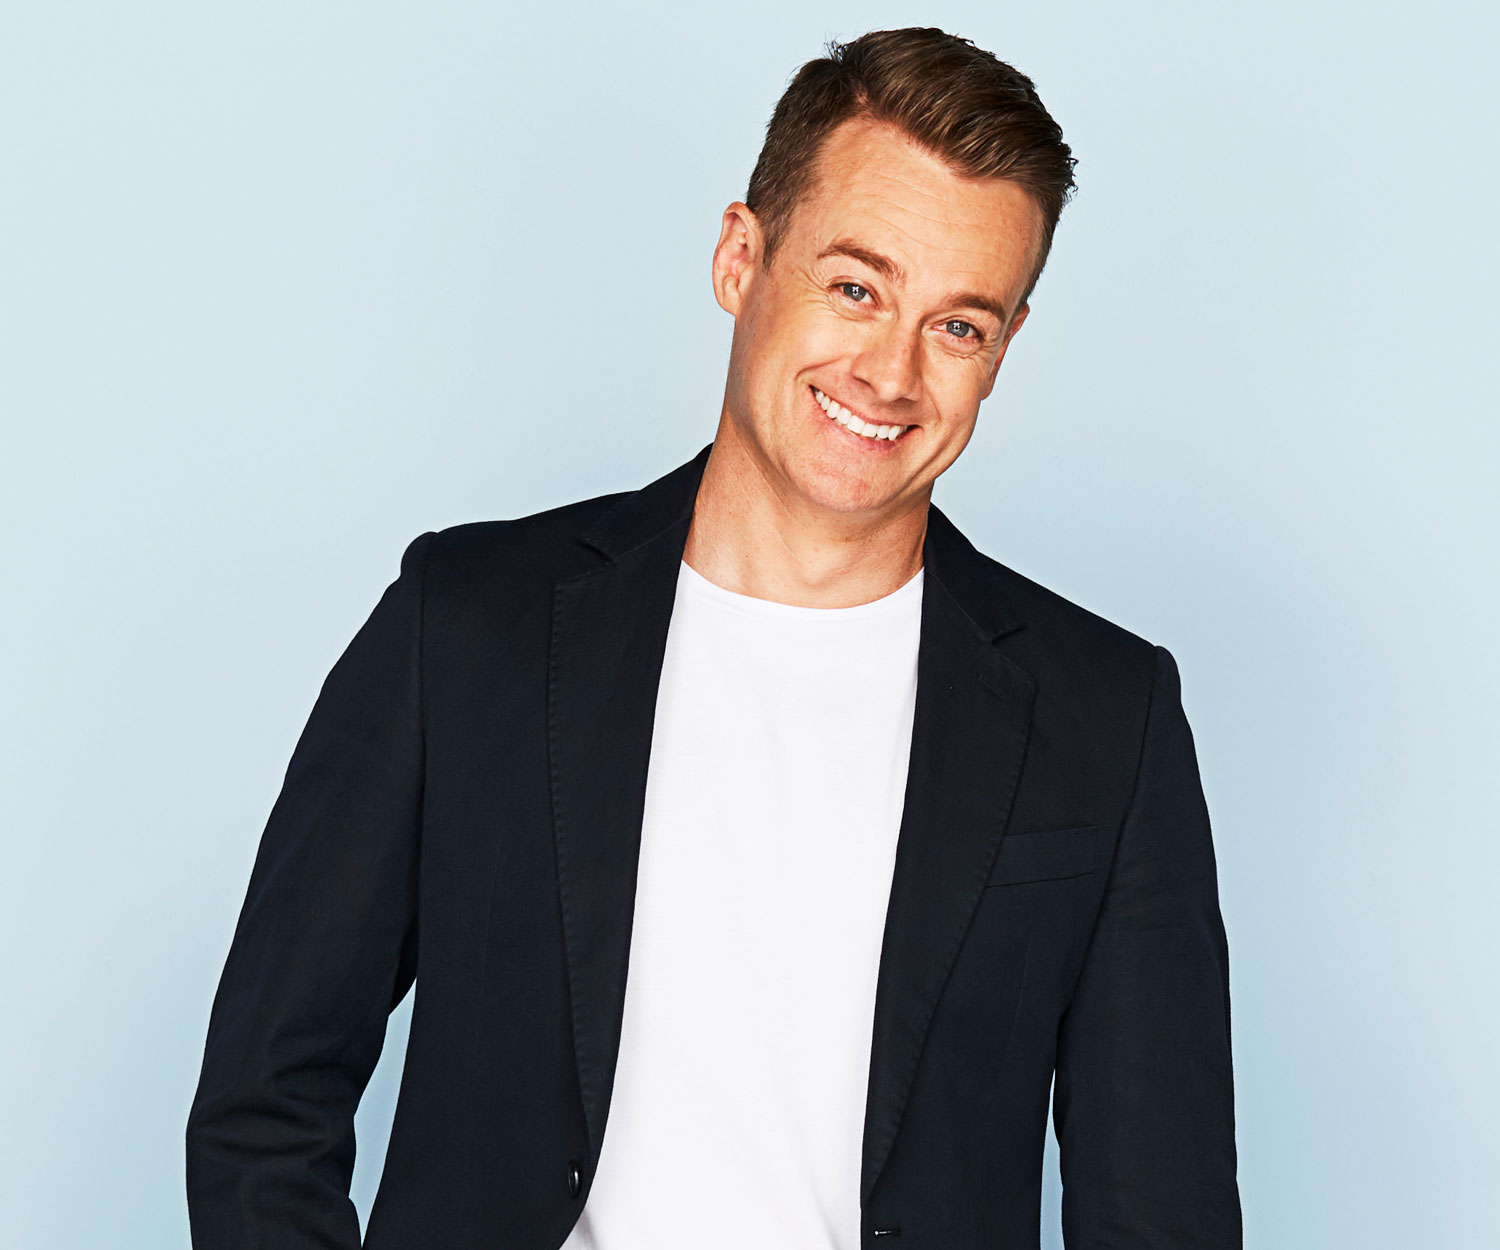 Grant Denyer has been on a rollercoaster in 2019, and he’s glad to survive the ride in one piece